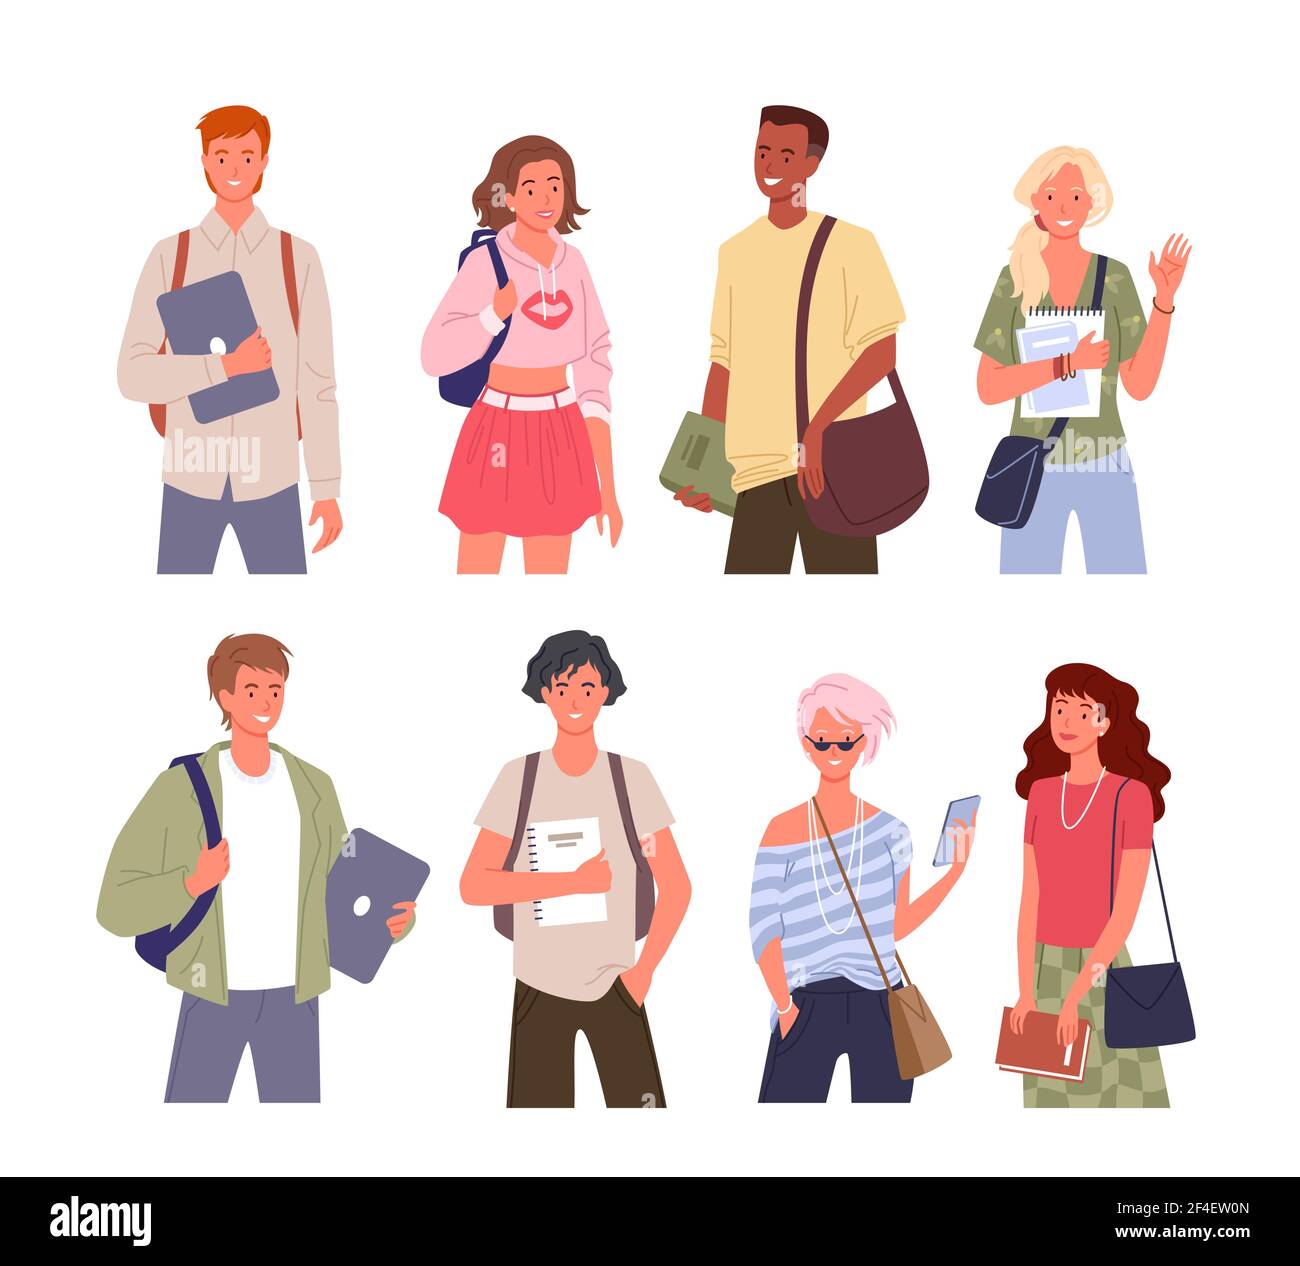 Student young multinational people diversity vector illustration set. Cartoon young man woman diverse characters standing in row and waving, holding Stock Vector